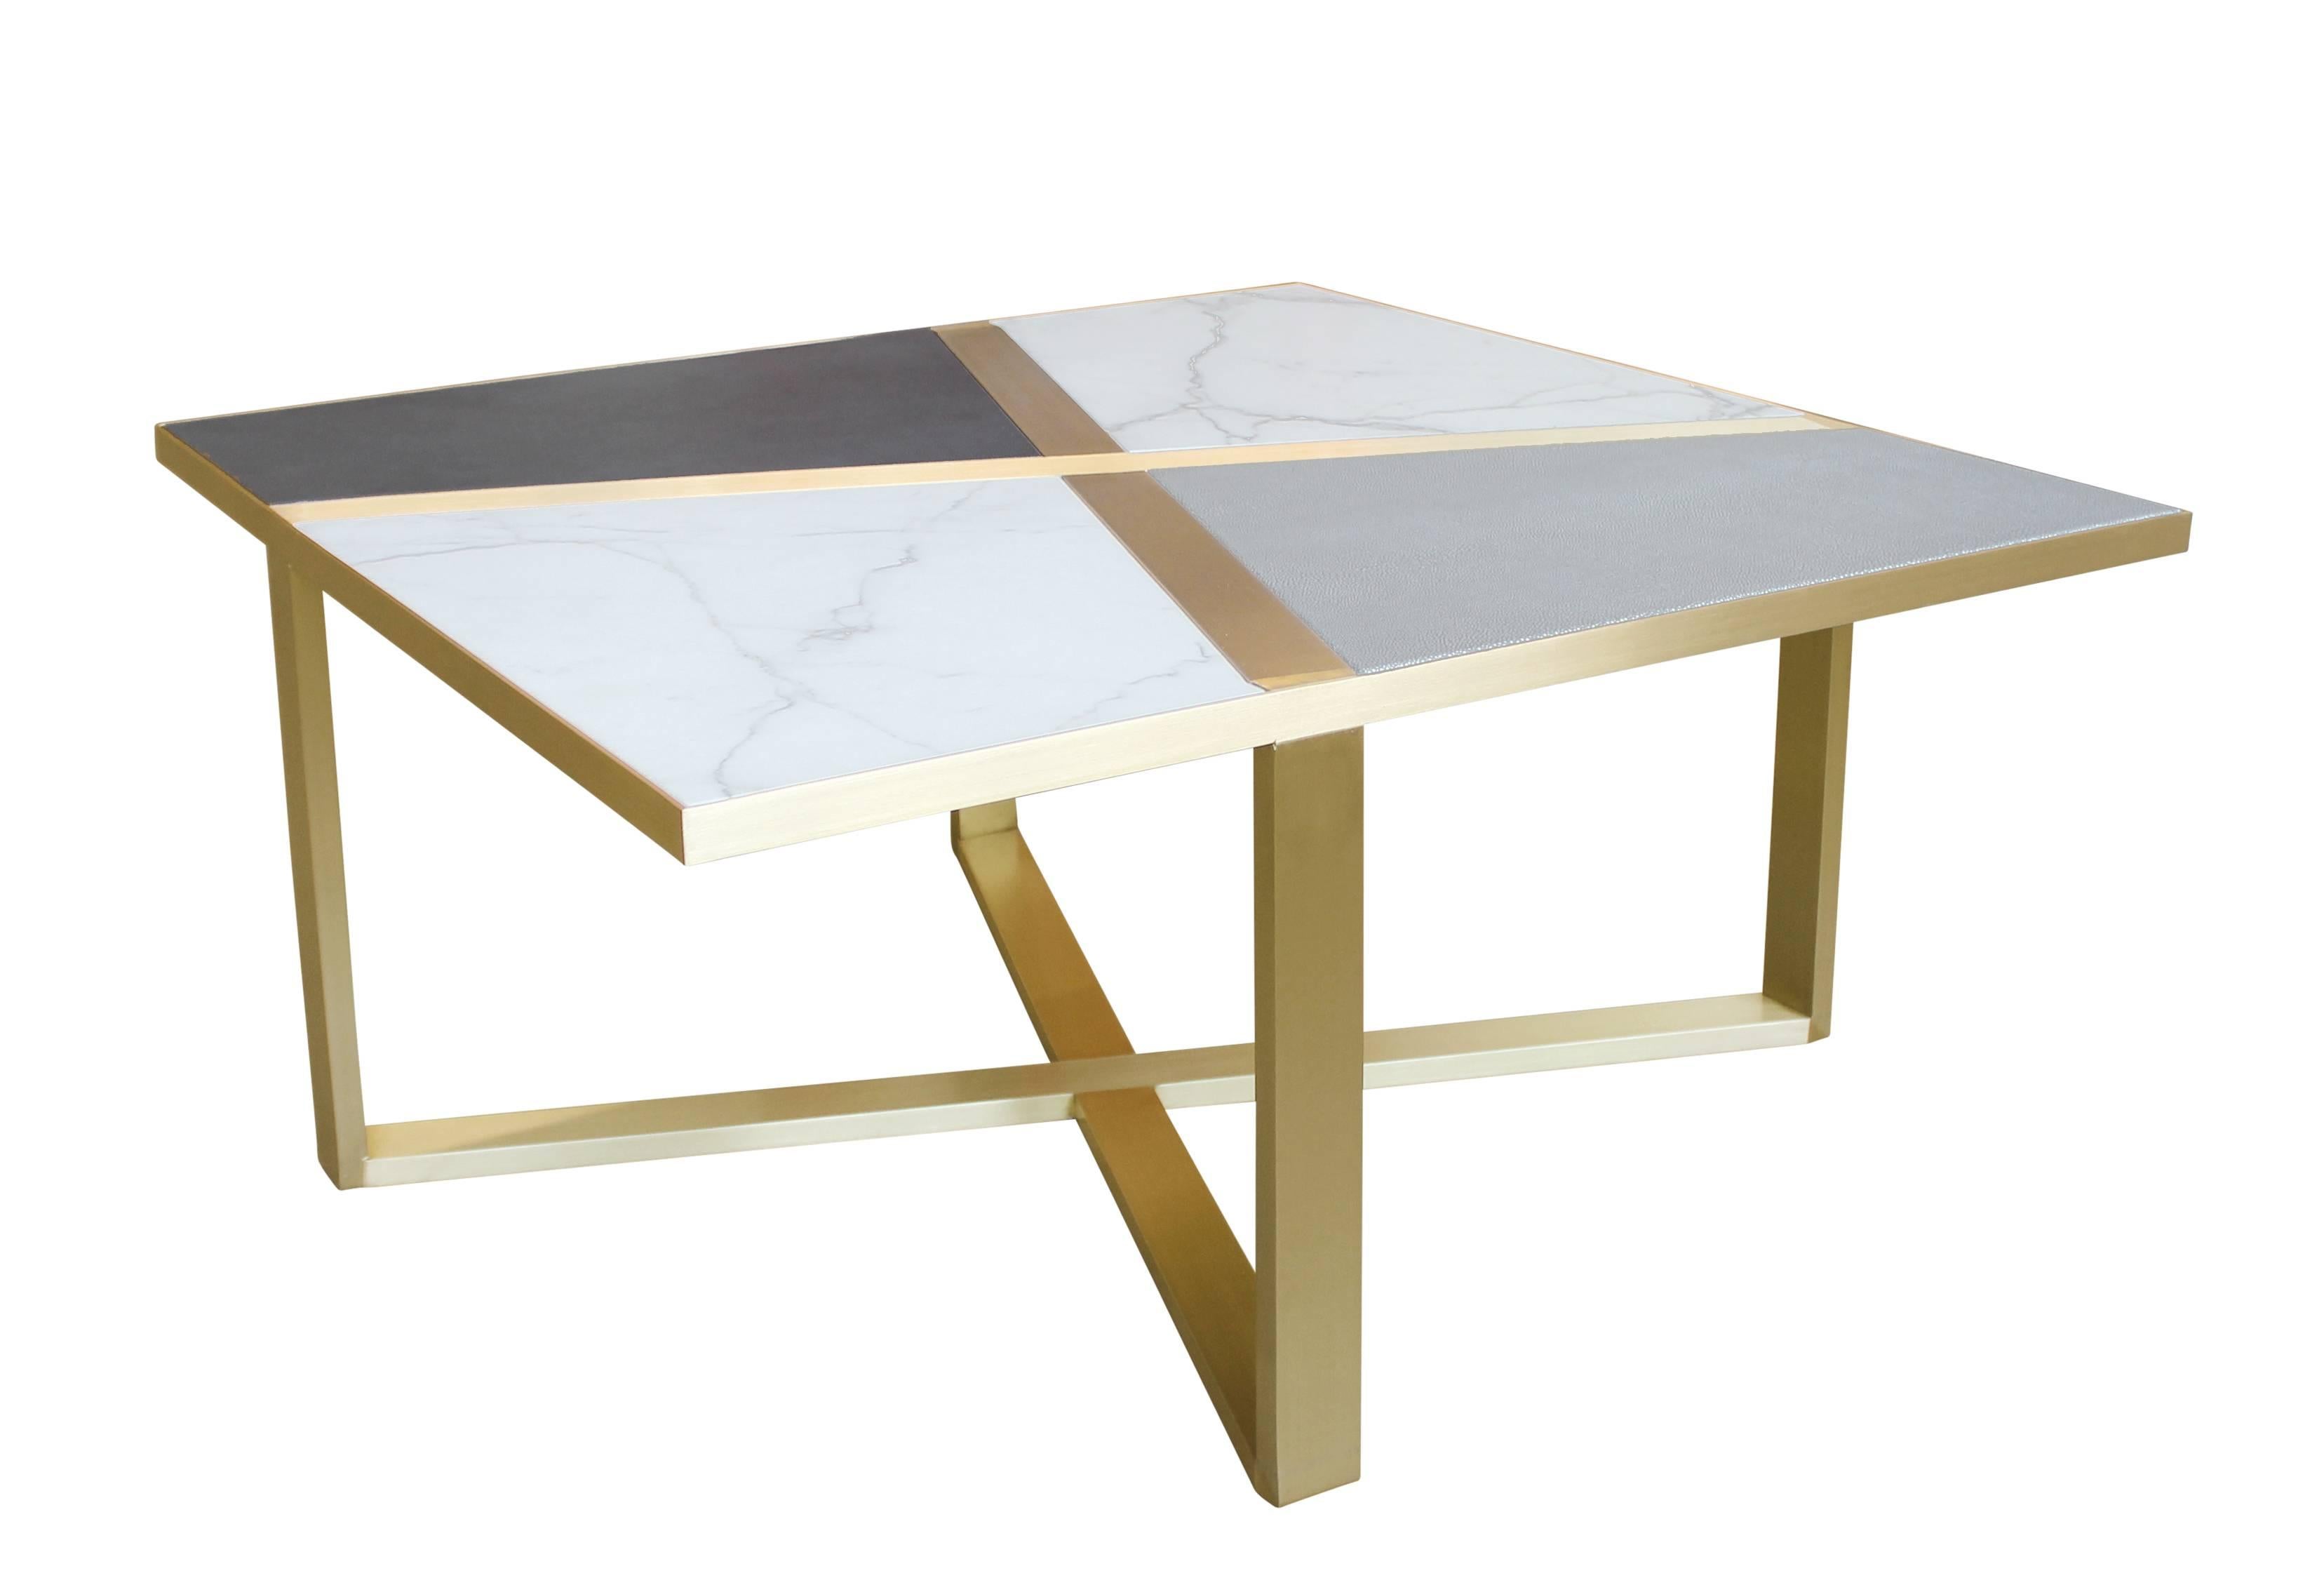 Bronze frame cocktail table with inset marble and leather panels. Available in custom sizes, finishes, materials, as well as COL. Each piece is made to order and be specified in any combination of material palettes.